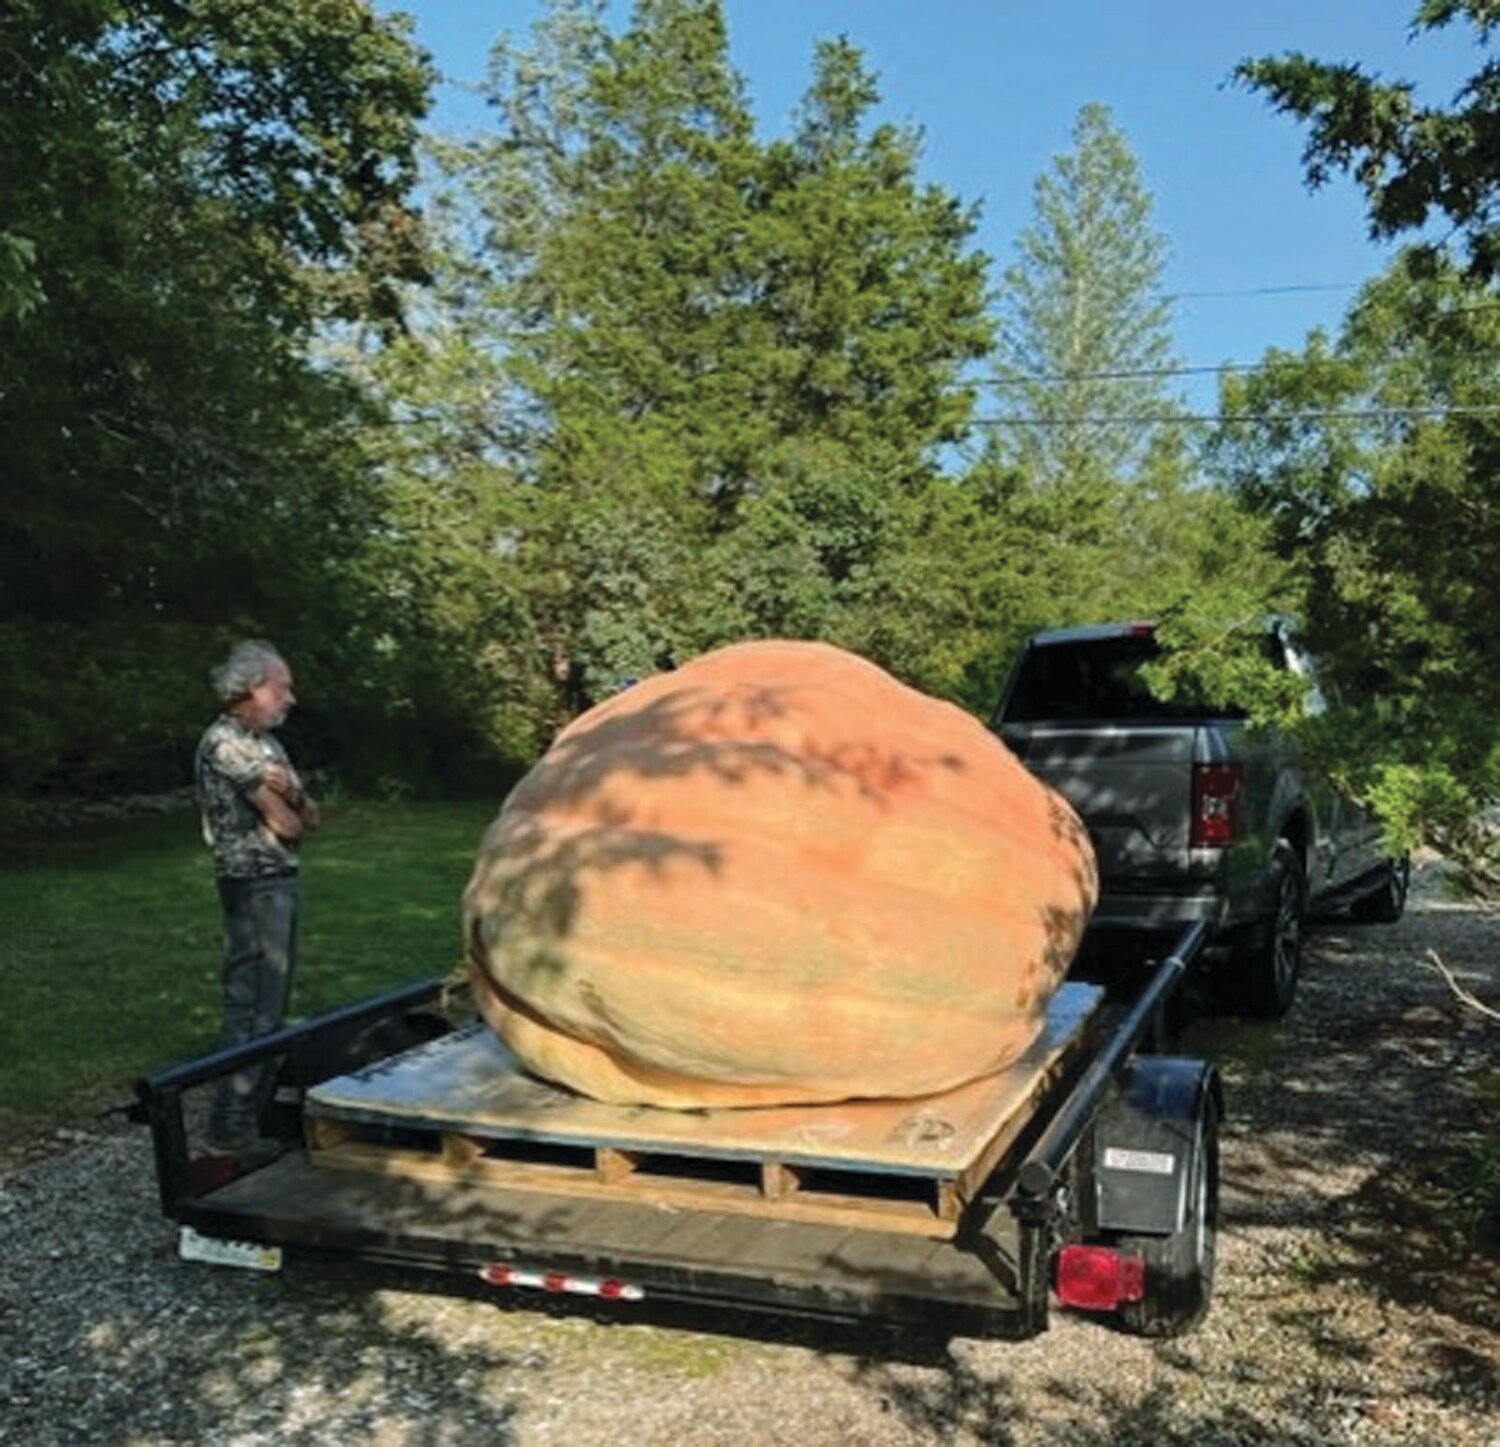 LA ULTIMA PEPO: Steve Sperry has one more monster to harvest. “The big one, I hope,” he said earlier this week. The final harvest and weigh-in is planned for this weekend. Only then will he know where his giant pumpkin growing skills rank in the world.